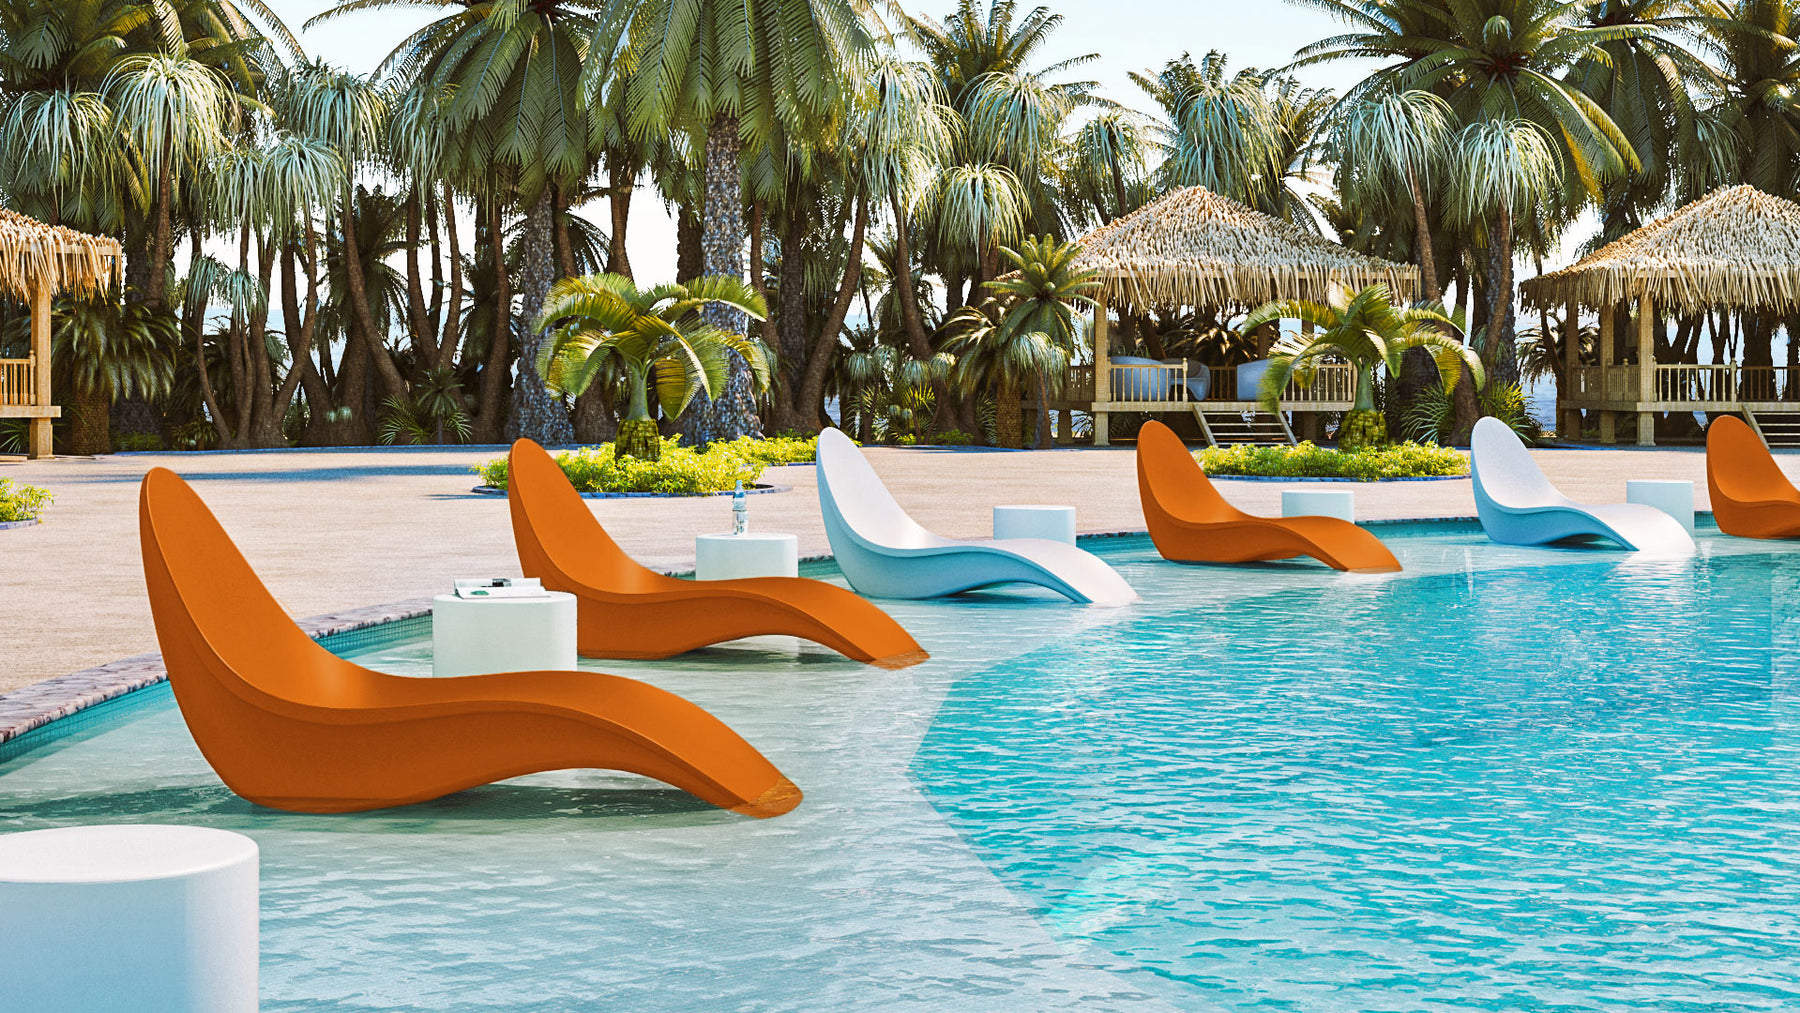 Bikini In-Pool Chaise Loungers line a commercial pool in alternating orange and white colors.